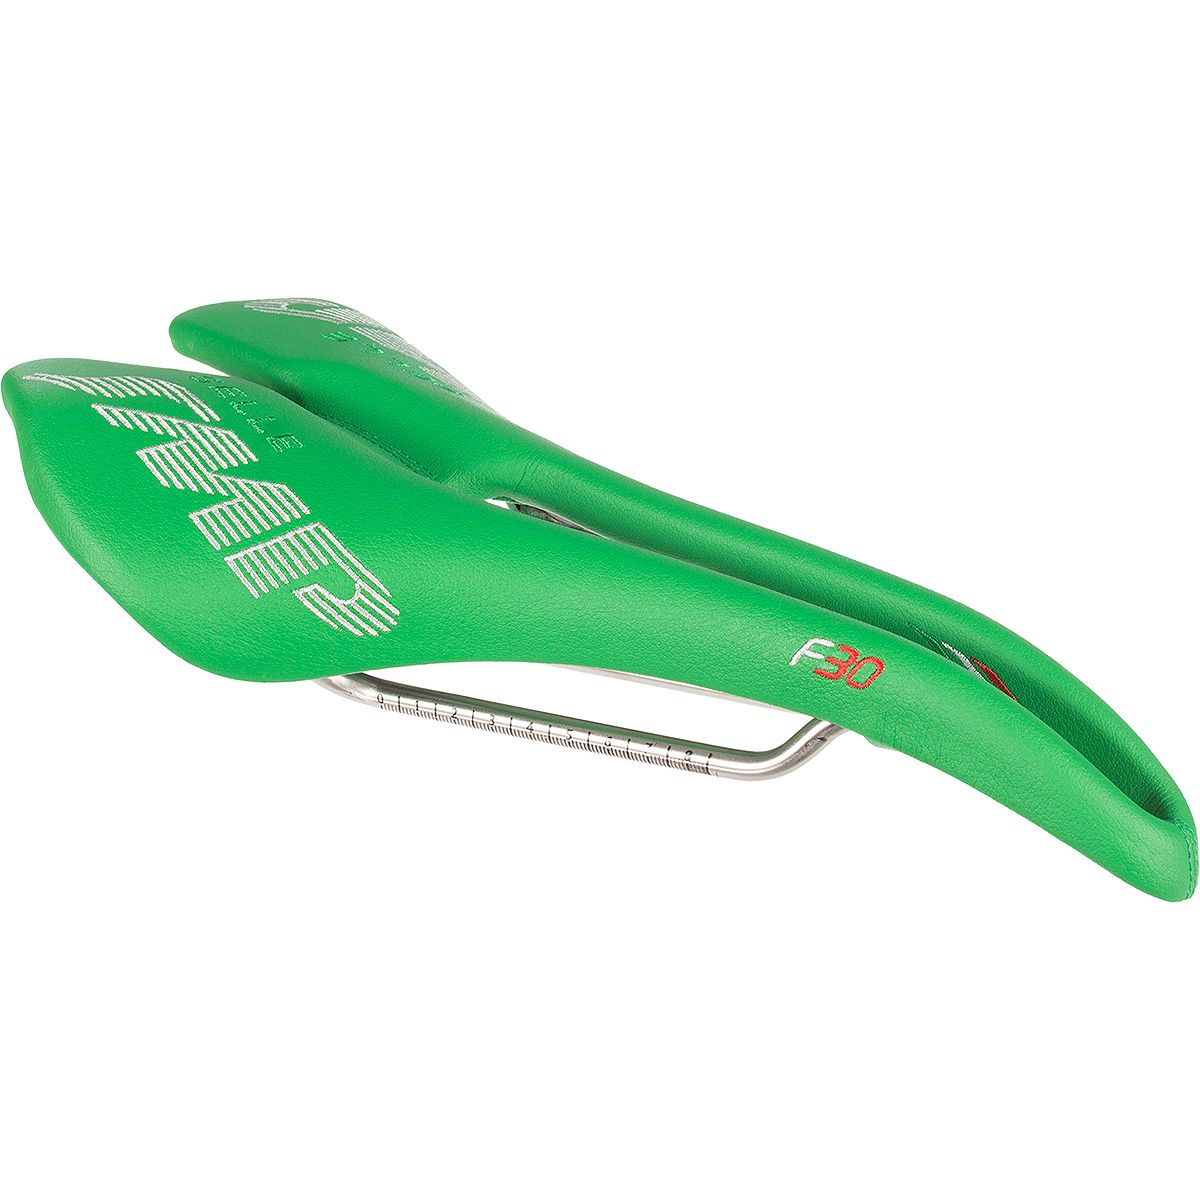 Selle SMP F30 Saddle - Components